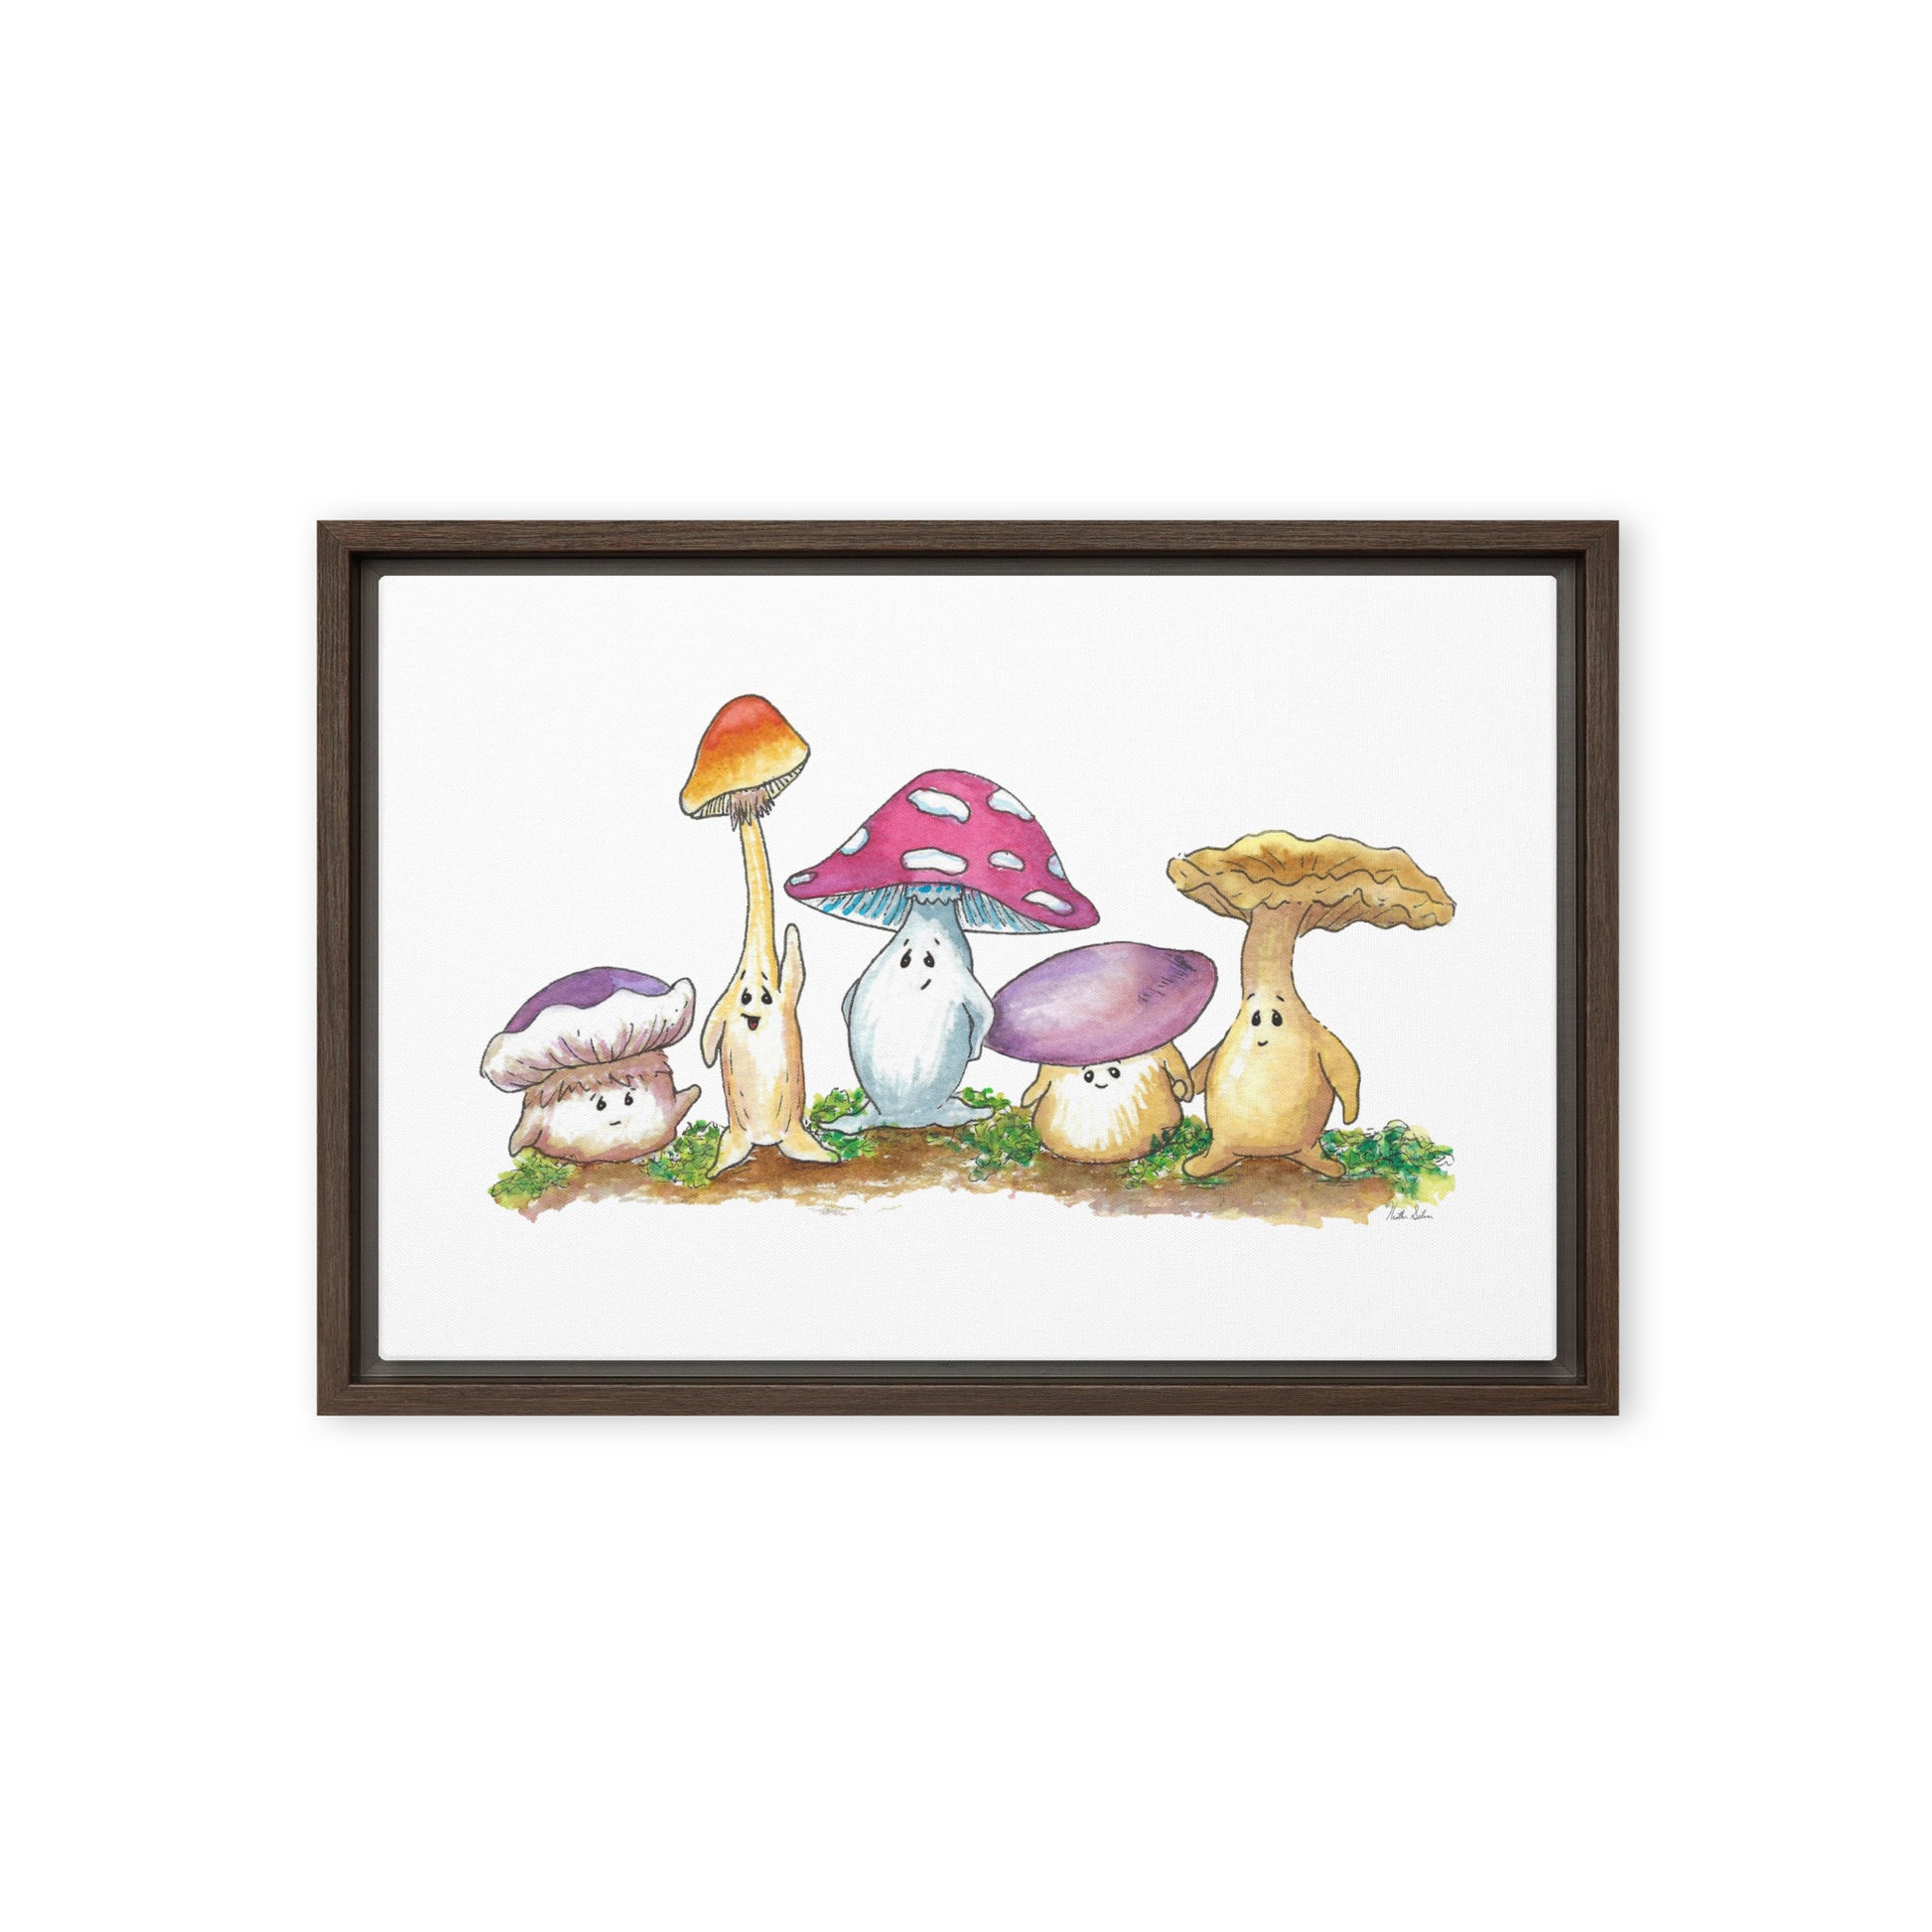 12 by 18 inch canvas print of Heather Silver's watercolor painting, Mushy and Friends. Framed in a dark brown pine wood frame that gives it a floating canvas effect.